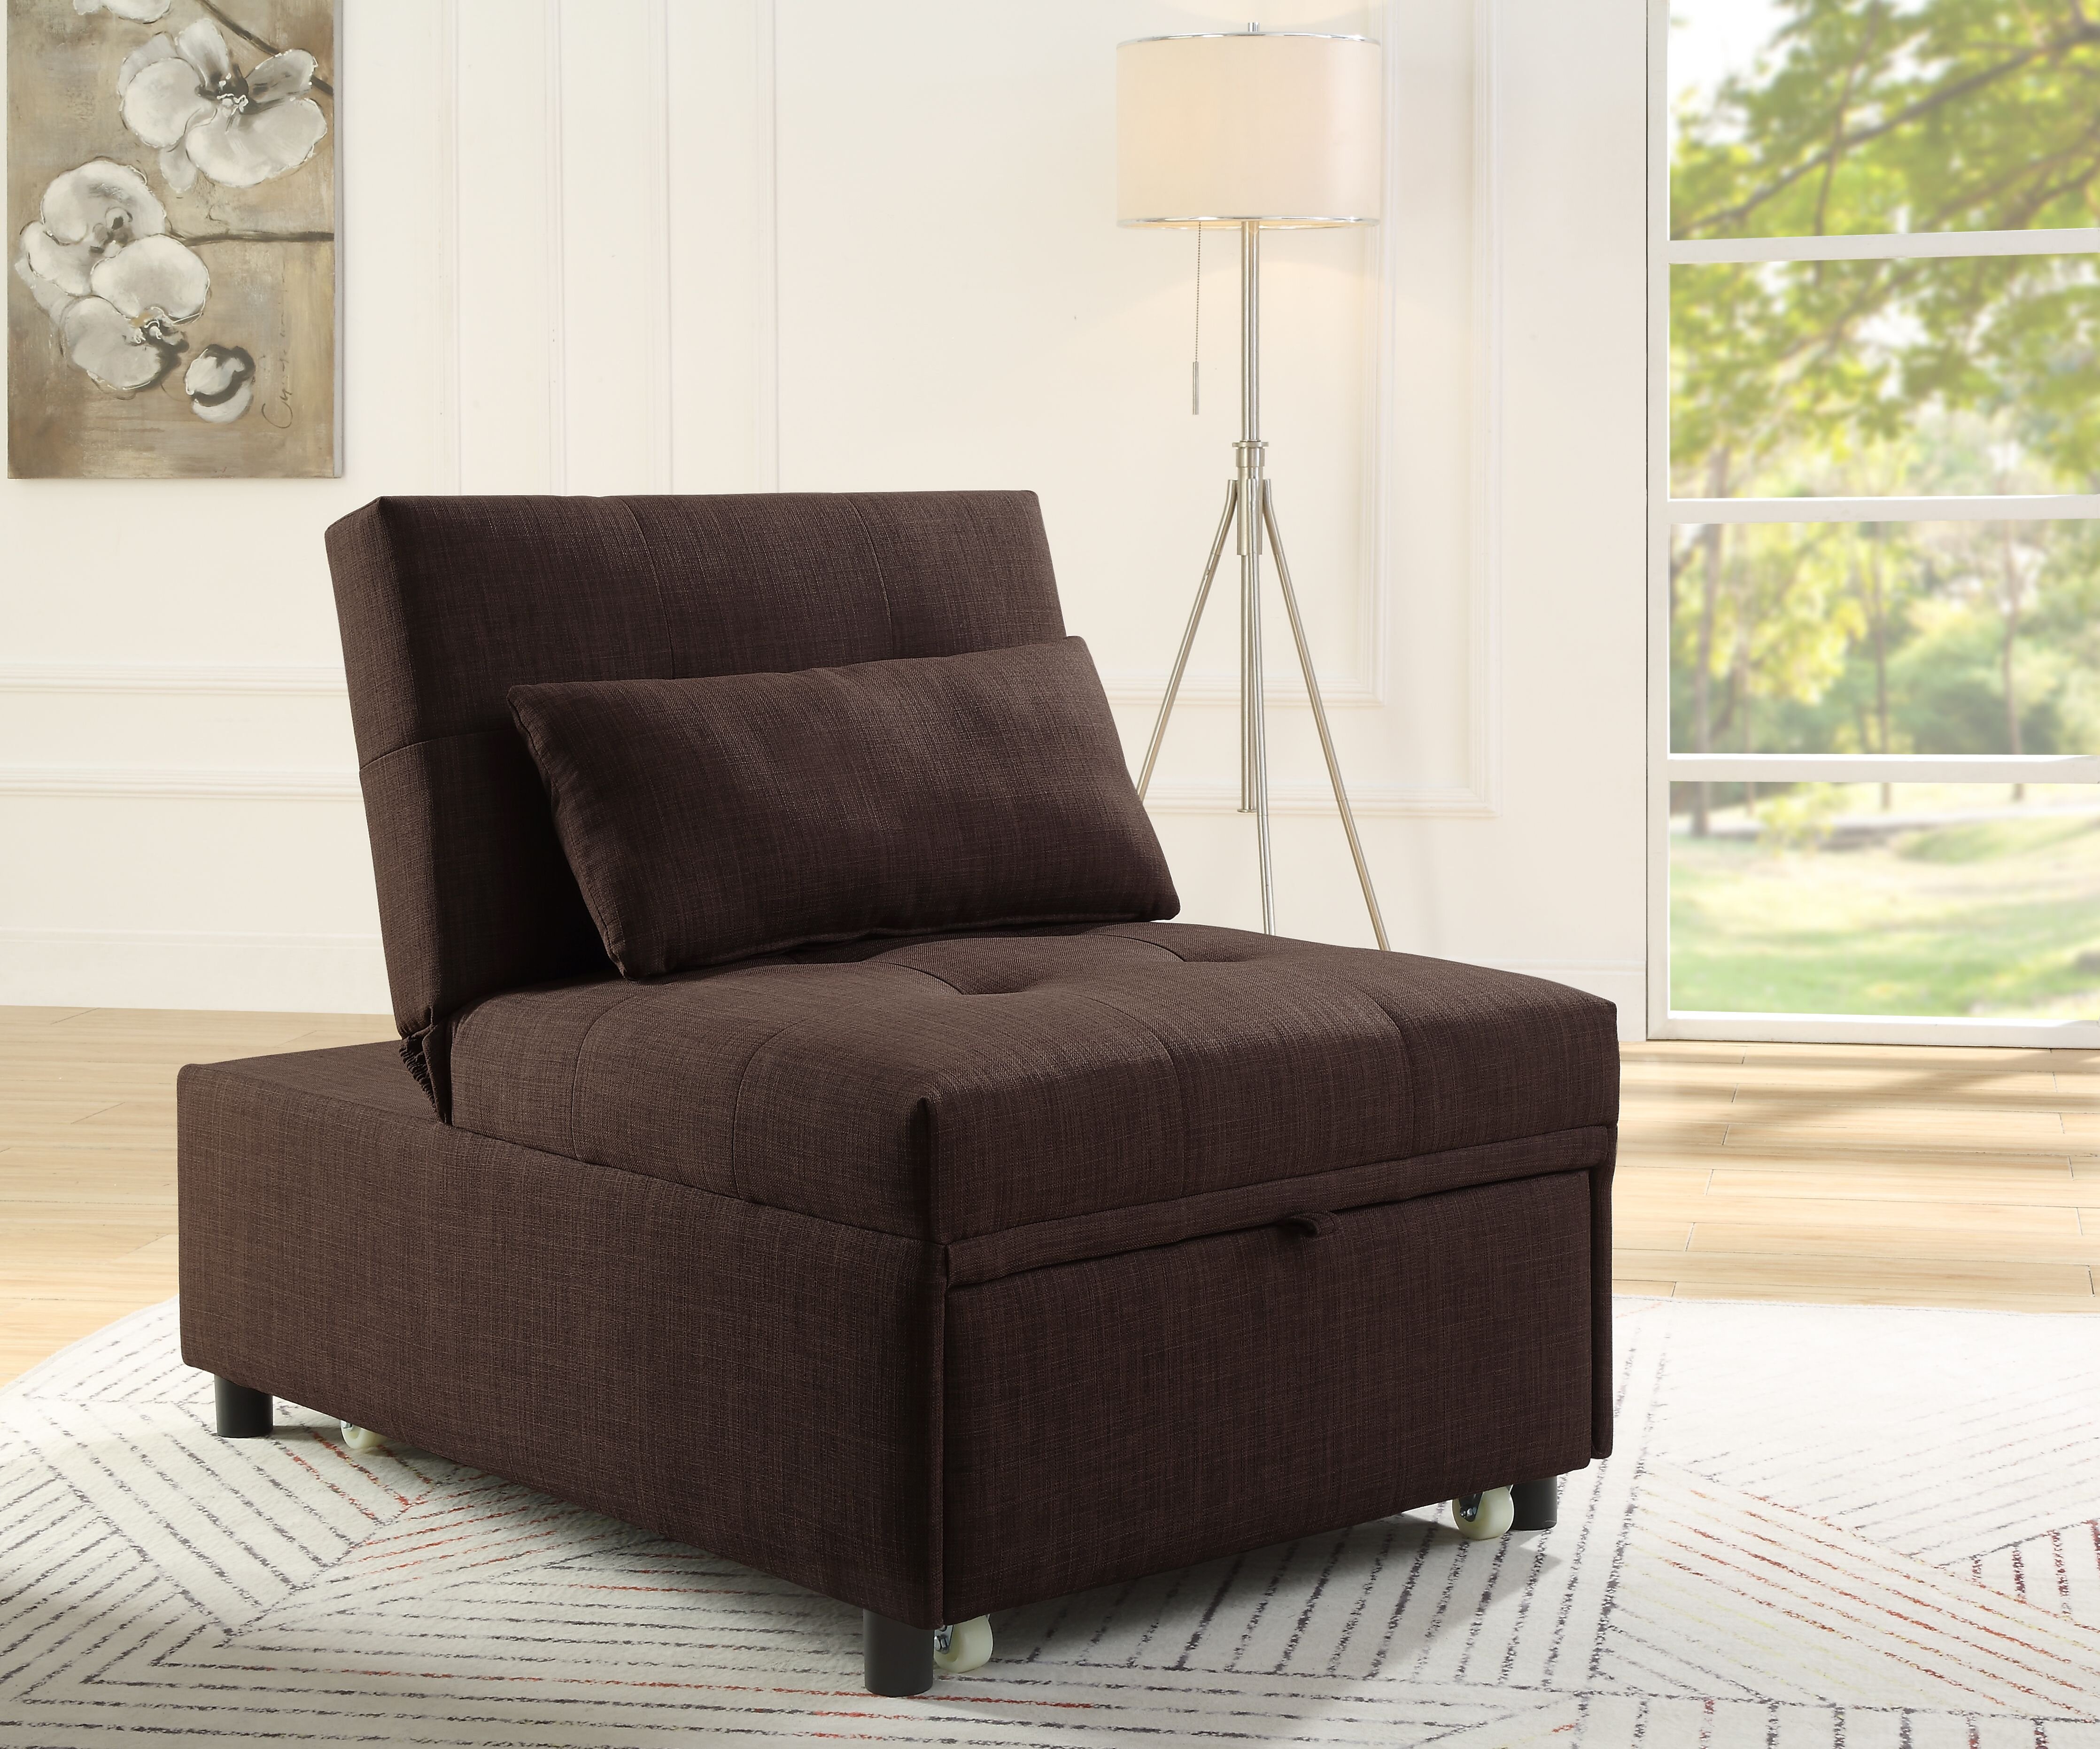 Dodger Sofa Bed, Brown Fabric